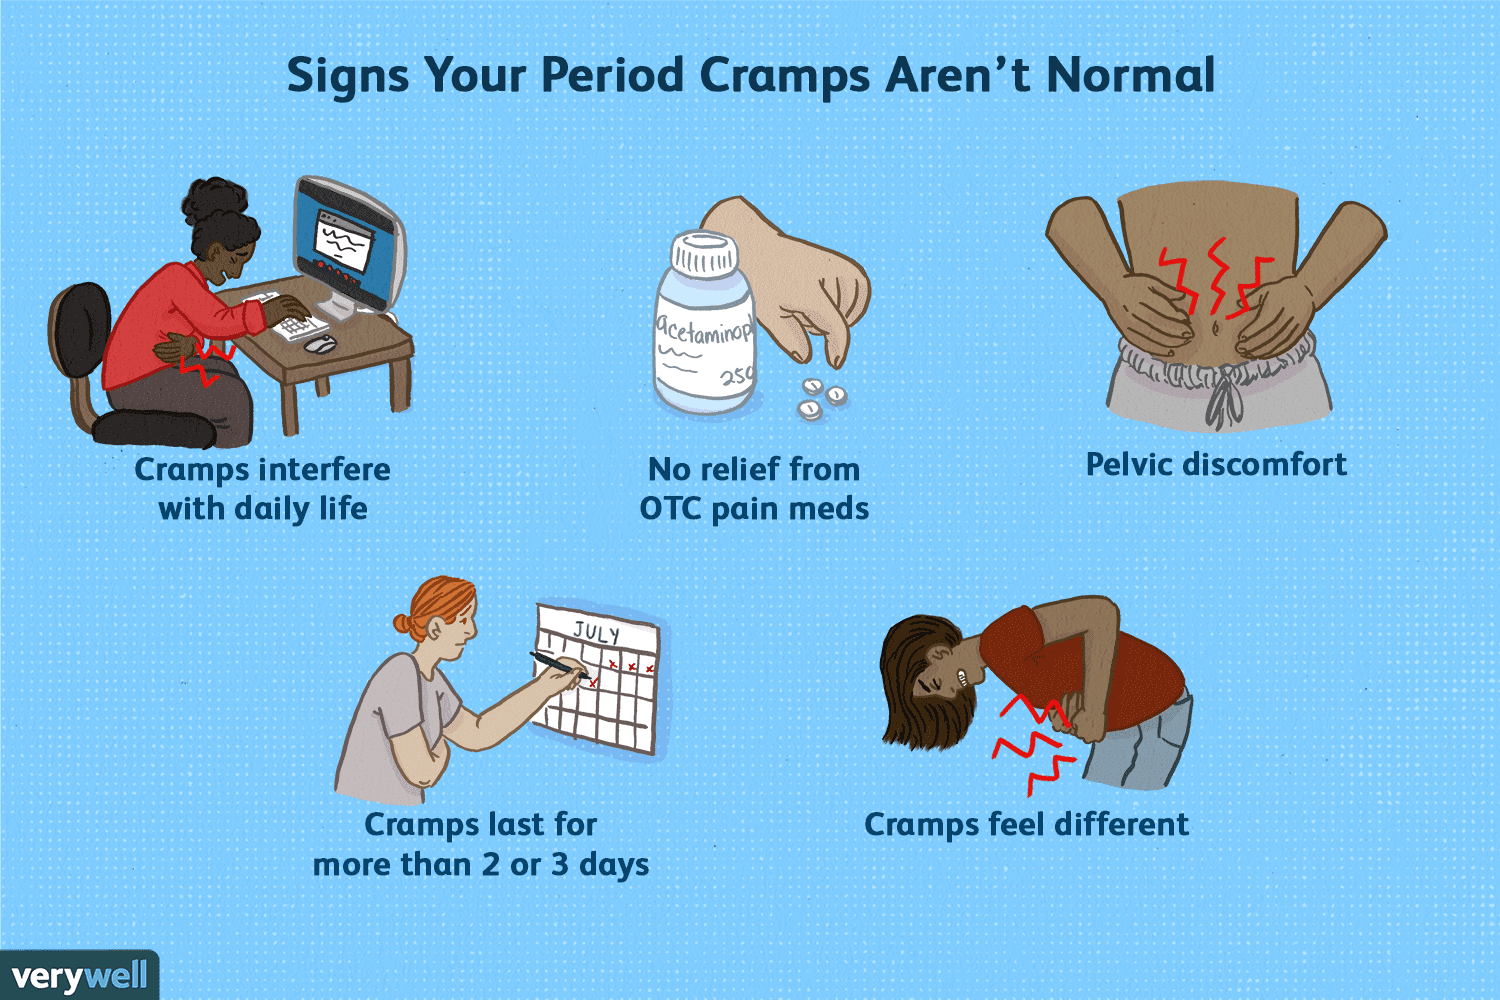 Signs of Abnormal or Unusual Period Cramps